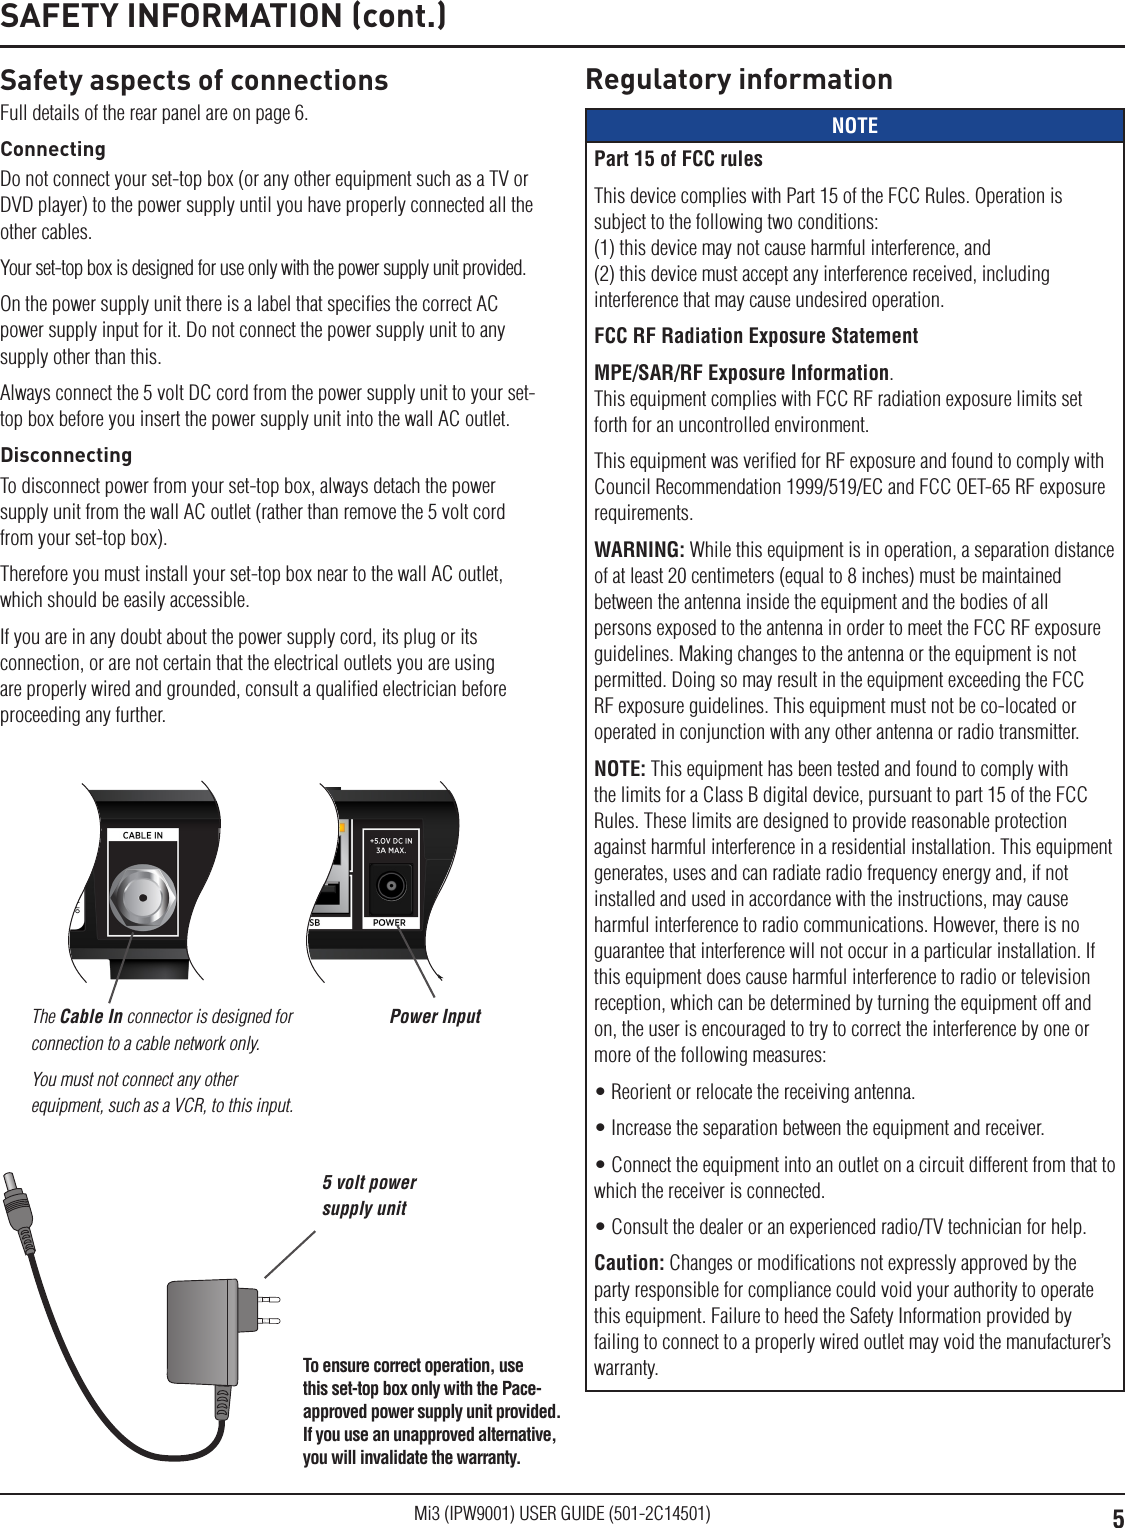 5Mi3 (IPW9001) USER GUIDE (501-2C14501)Safety aspects of connectionsFull details of the rear panel are on page 6.ConnectingDo not connect your set-top box (or any other equipment such as a TV or DVD player) to the power supply until you have properly connected all the other cables.Your set-top box is designed for use only with the power supply unit provided.On the power supply unit there is a label that speciﬁes the correct AC power supply input for it. Do not connect the power supply unit to any supply other than this.Always connect the 5 volt DC cord from the power supply unit to your set-top box before you insert the power supply unit into the wall AC outlet.DisconnectingTo disconnect power from your set-top box, always detach the power supply unit from the wall AC outlet (rather than remove the 5 volt cord from your set-top box).Therefore you must install your set-top box near to the wall AC outlet, which should be easily accessible.If you are in any doubt about the power supply cord, its plug or its connection, or are not certain that the electrical outlets you are using are properly wired and grounded, consult a qualiﬁed electrician before proceeding any further.SAFETY INFORMATION (cont.)The Cable In connector is designed for connection to a cable network only.You must not connect any other equipment, such as a VCR, to this input.Power InputRegulatory informationNOTEPart 15 of FCC rulesThis device complies with Part 15 of the FCC Rules. Operation is subject to the following two conditions: (1) this device may not cause harmful interference, and  (2) this device must accept any interference received, including interference that may cause undesired operation. FCC RF Radiation Exposure StatementMPE/SAR/RF Exposure Information.  This equipment complies with FCC RF radiation exposure limits set forth for an uncontrolled environment.This equipment was veriﬁed for RF exposure and found to comply with Council Recommendation 1999/519/EC and FCC OET-65 RF exposure requirements.WARNING: While this equipment is in operation, a separation distance of at least 20 centimeters (equal to 8 inches) must be maintained between the antenna inside the equipment and the bodies of all persons exposed to the antenna in order to meet the FCC RF exposure guidelines. Making changes to the antenna or the equipment is not permitted. Doing so may result in the equipment exceeding the FCC RF exposure guidelines. This equipment must not be co-located or operated in conjunction with any other antenna or radio transmitter.NOTE: This equipment has been tested and found to comply with the limits for a Class B digital device, pursuant to part 15 of the FCC Rules. These limits are designed to provide reasonable protection against harmful interference in a residential installation. This equipment generates, uses and can radiate radio frequency energy and, if not installed and used in accordance with the instructions, may cause harmful interference to radio communications. However, there is no guarantee that interference will not occur in a particular installation. If this equipment does cause harmful interference to radio or television reception, which can be determined by turning the equipment off and on, the user is encouraged to try to correct the interference by one or more of the following measures:• Reorient or relocate the receiving antenna.• Increase the separation between the equipment and receiver.• Connect the equipment into an outlet on a circuit different from that to which the receiver is connected.• Consult the dealer or an experienced radio/TV technician for help.Caution: Changes or modiﬁcations not expressly approved by the party responsible for compliance could void your authority to operate this equipment. Failure to heed the Safety Information provided by failing to connect to a properly wired outlet may void the manufacturer’s warranty.5 volt power supply unitTo ensure correct operation, use this set-top box only with the Pace-approved power supply unit provided. If you use an unapproved alternative, you will invalidate the warranty.